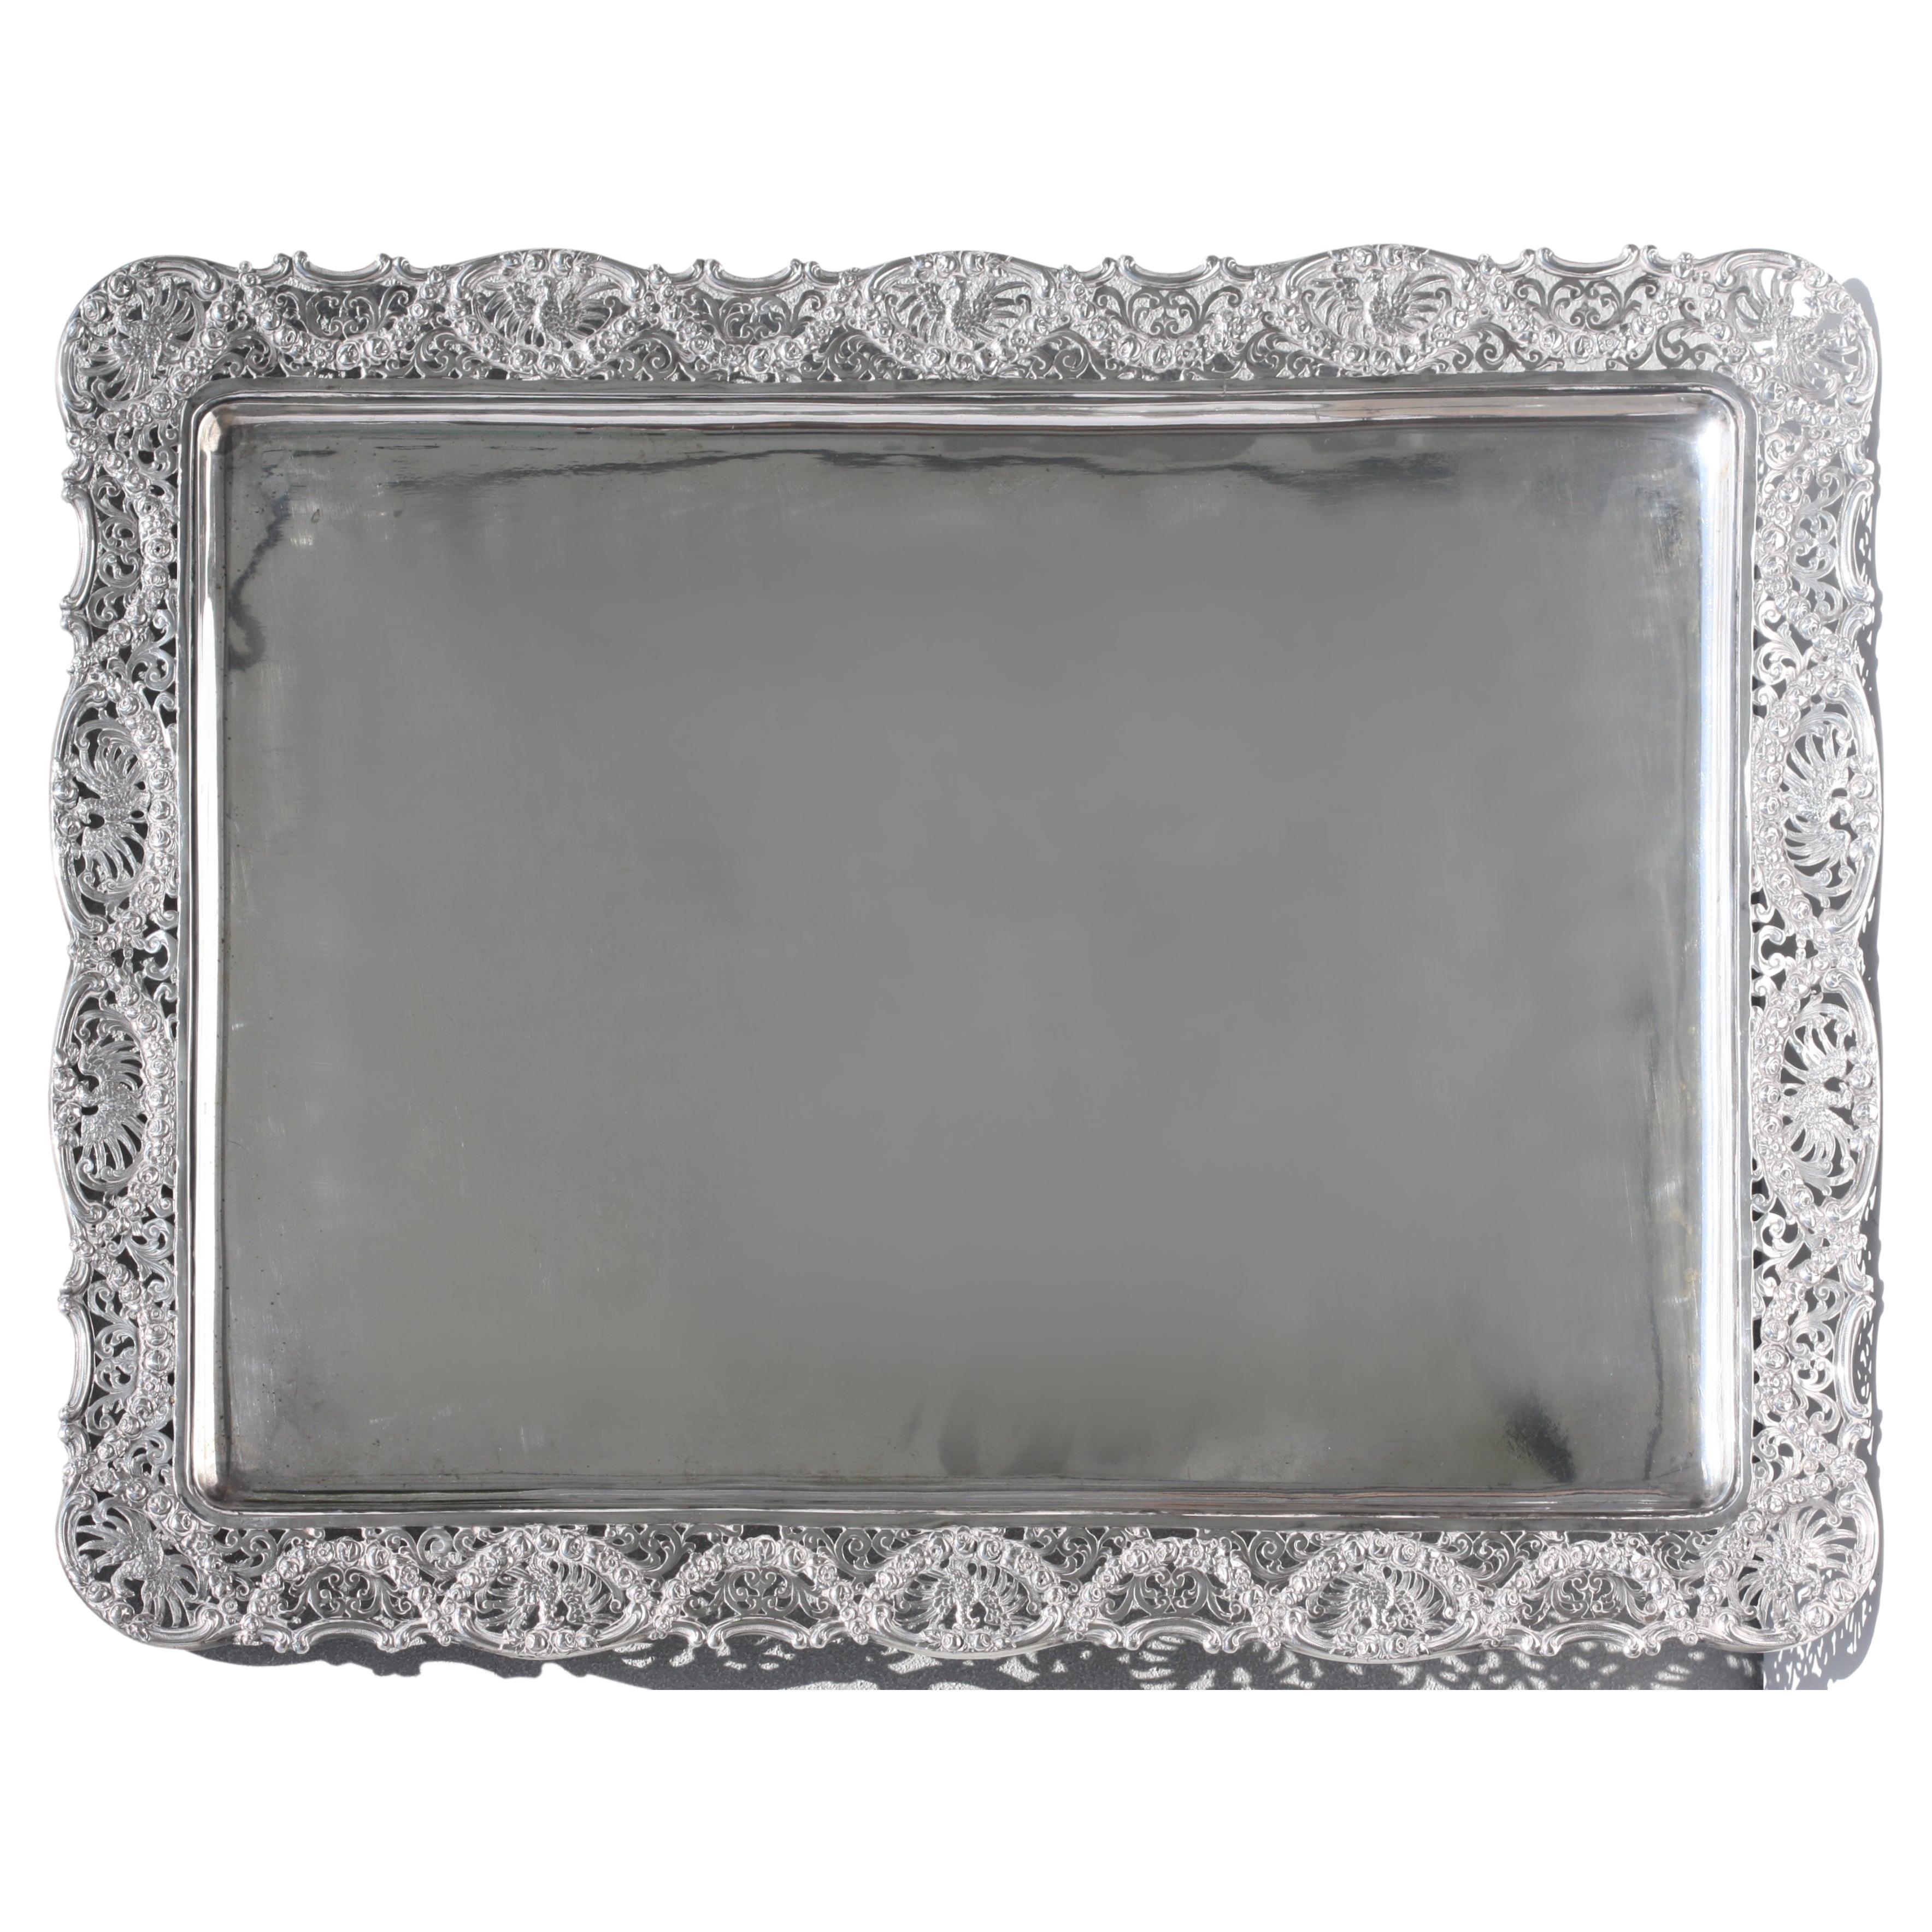 Continental Silver Rectangular Tray, Probably German